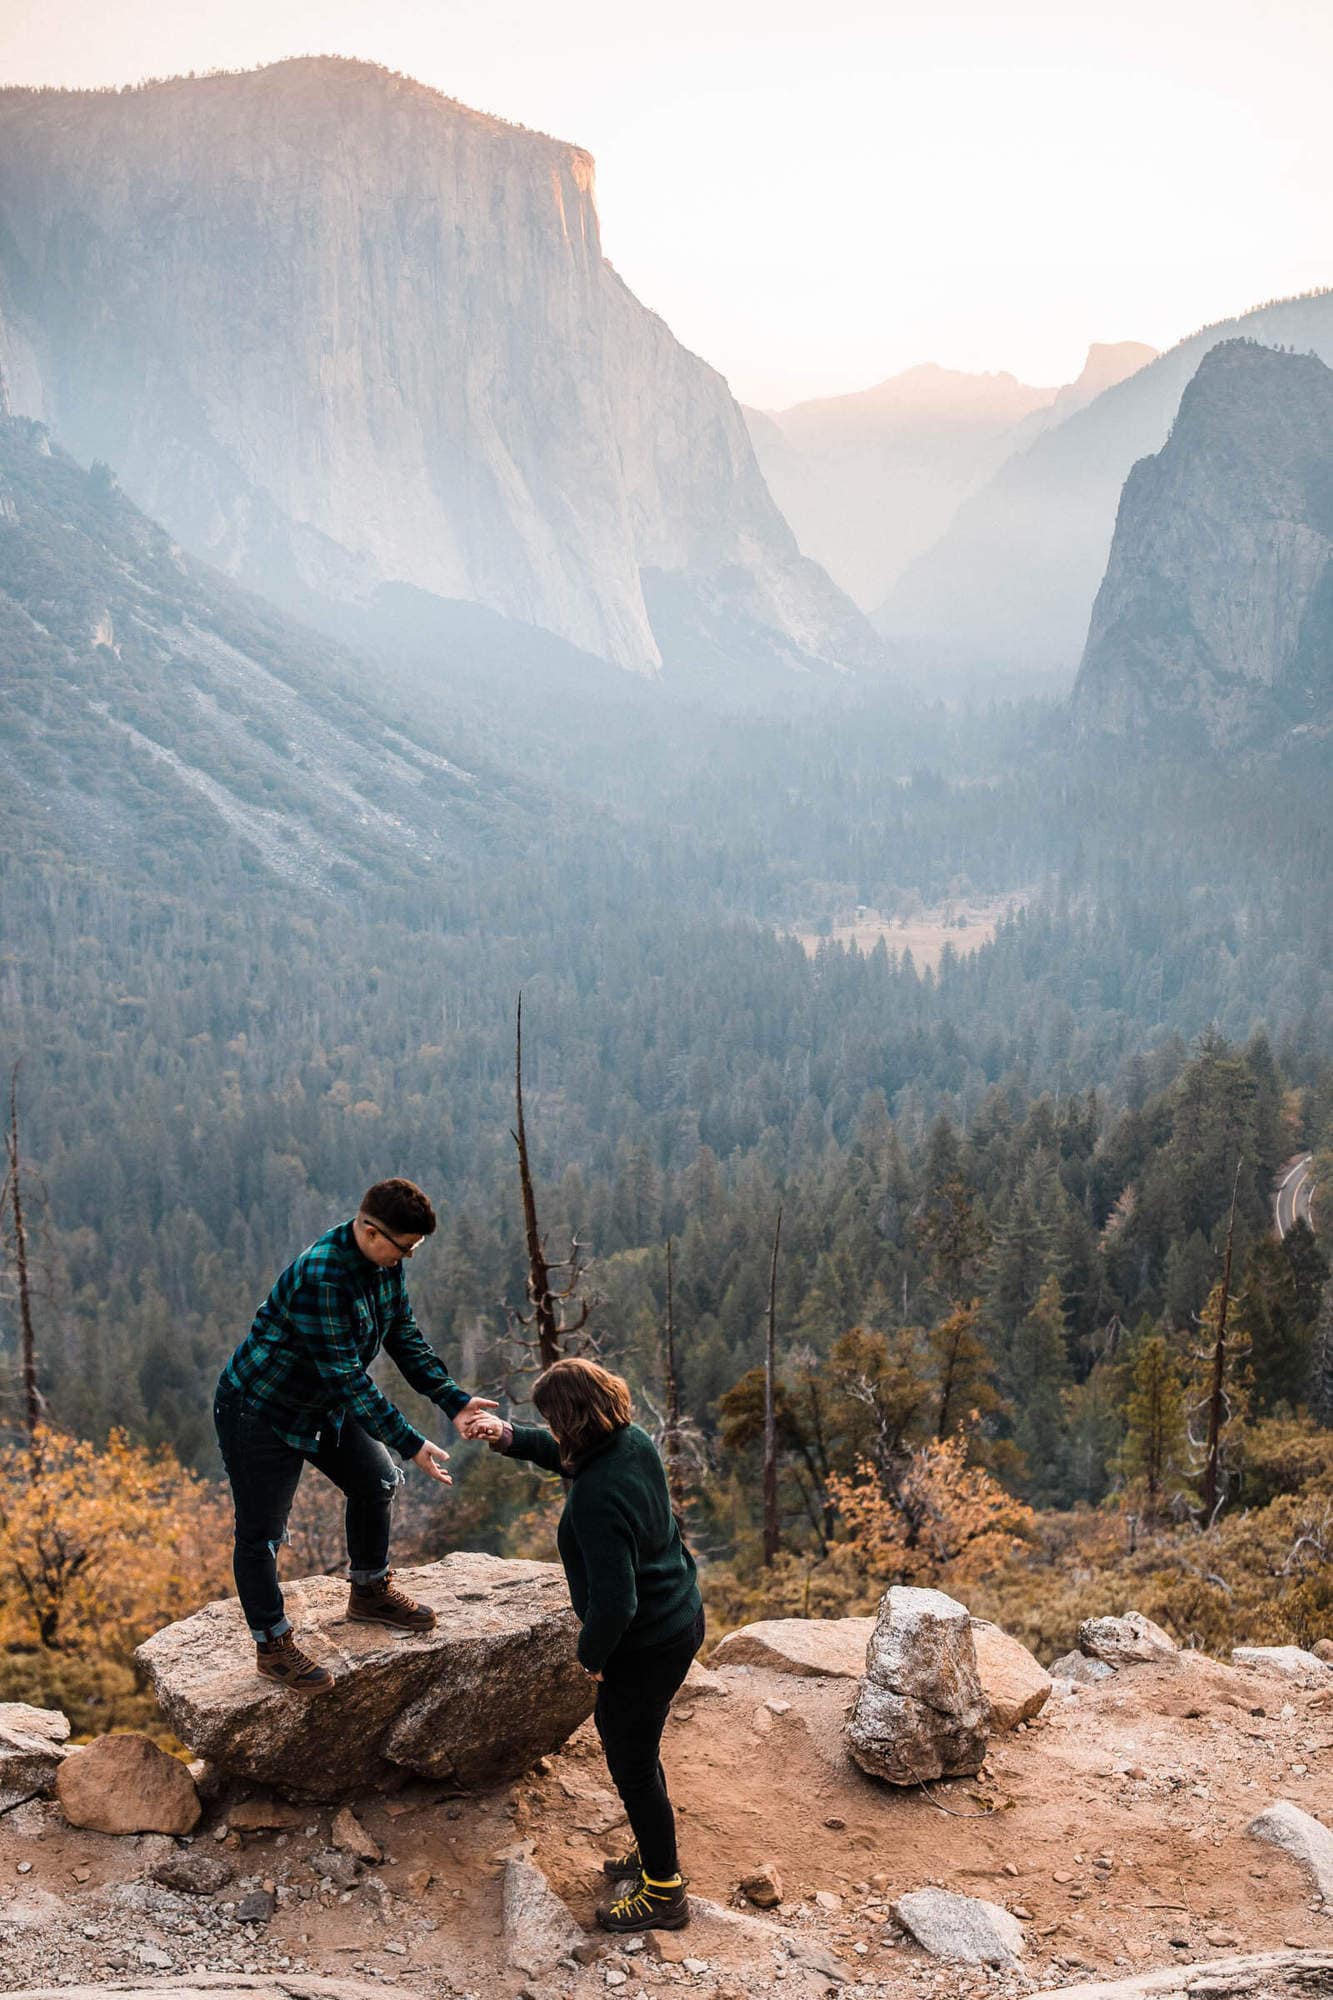 Yosemite is a dream place for an elopement. Check out this Yosemite elopement planning guide for all the info you'll need to plan your elopement adventure.